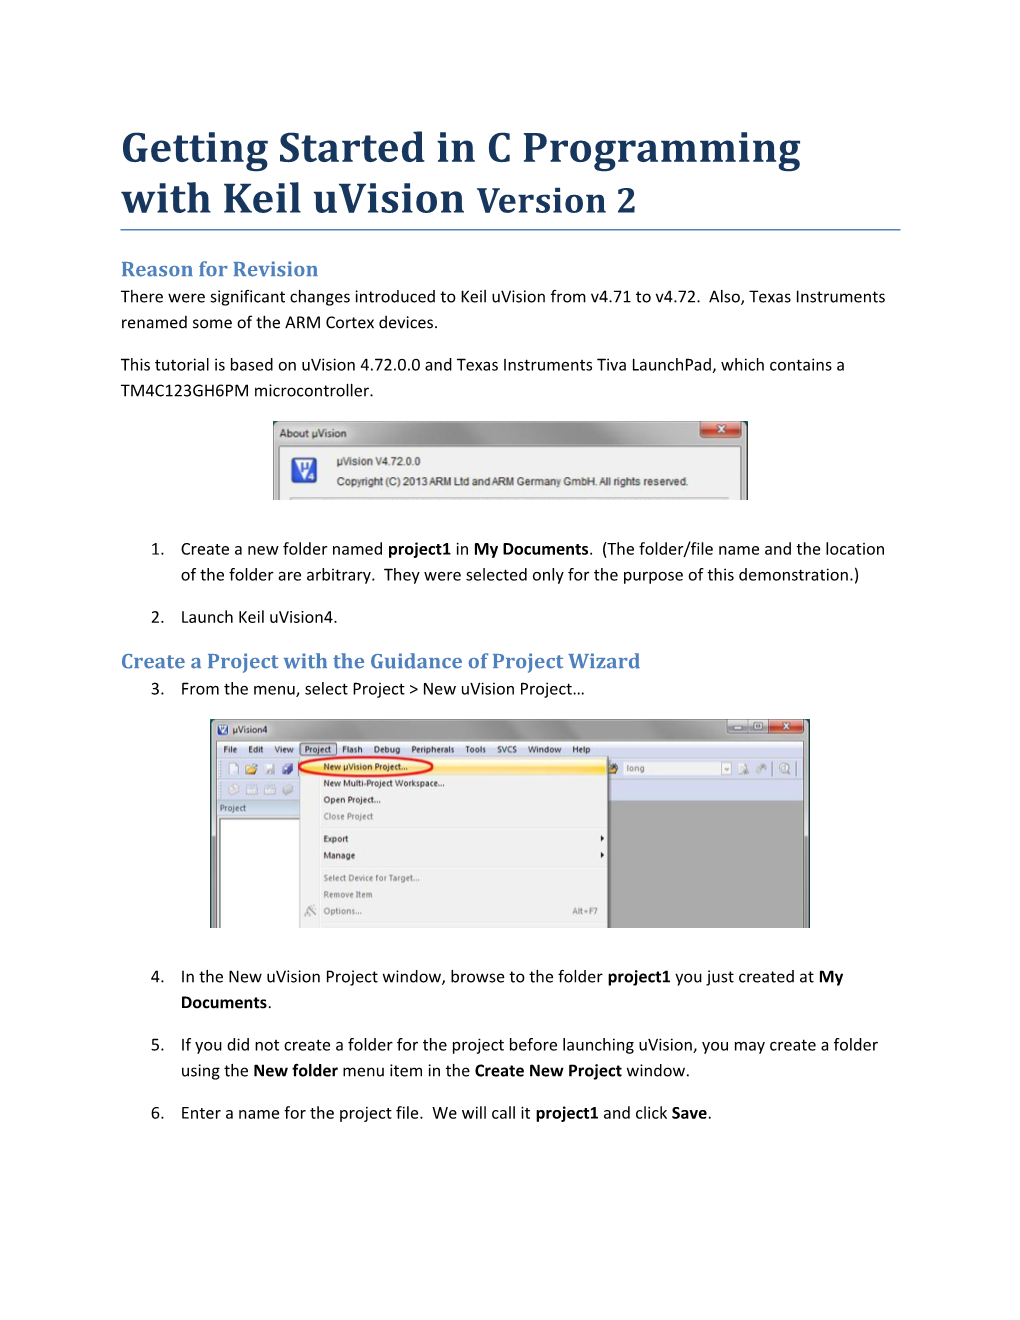 Getting Started in C Programming with Keiluvisionversion 2